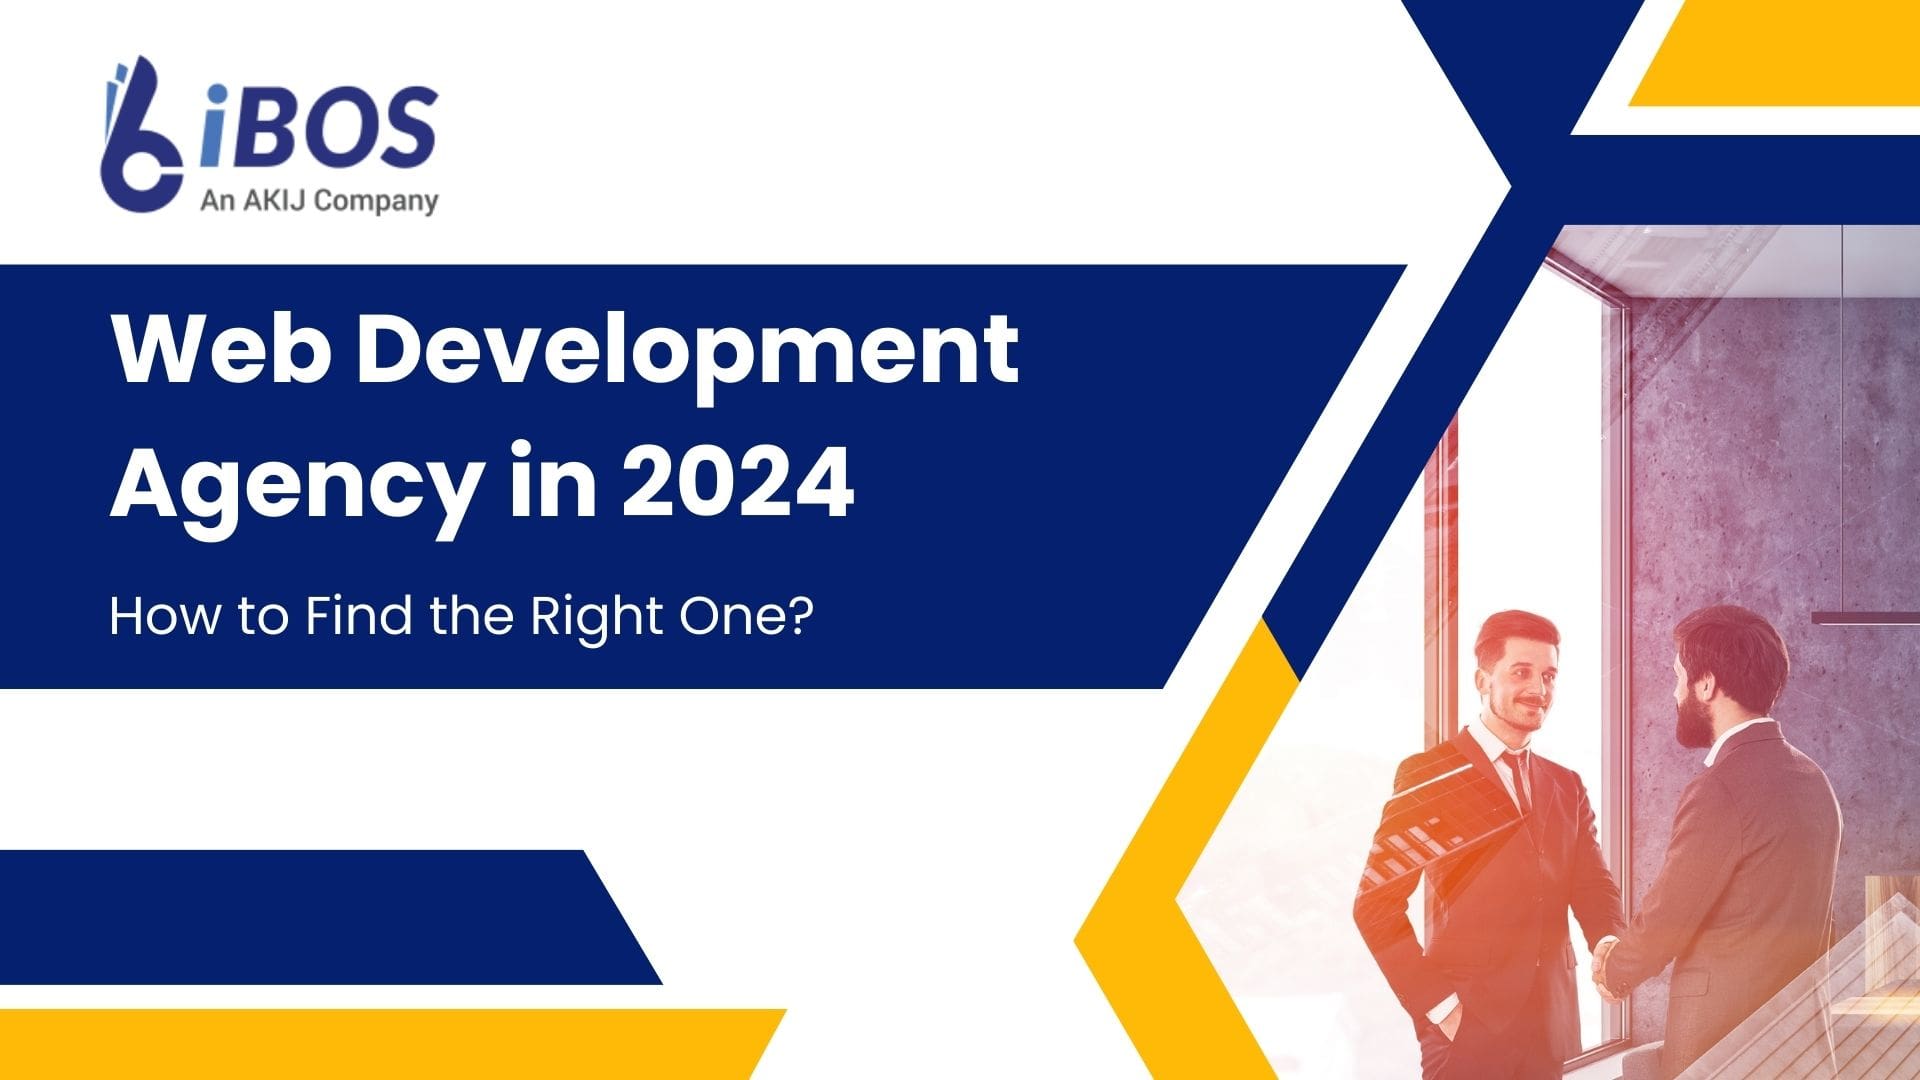 Web Development Agency in 2024 How to Find the Right One